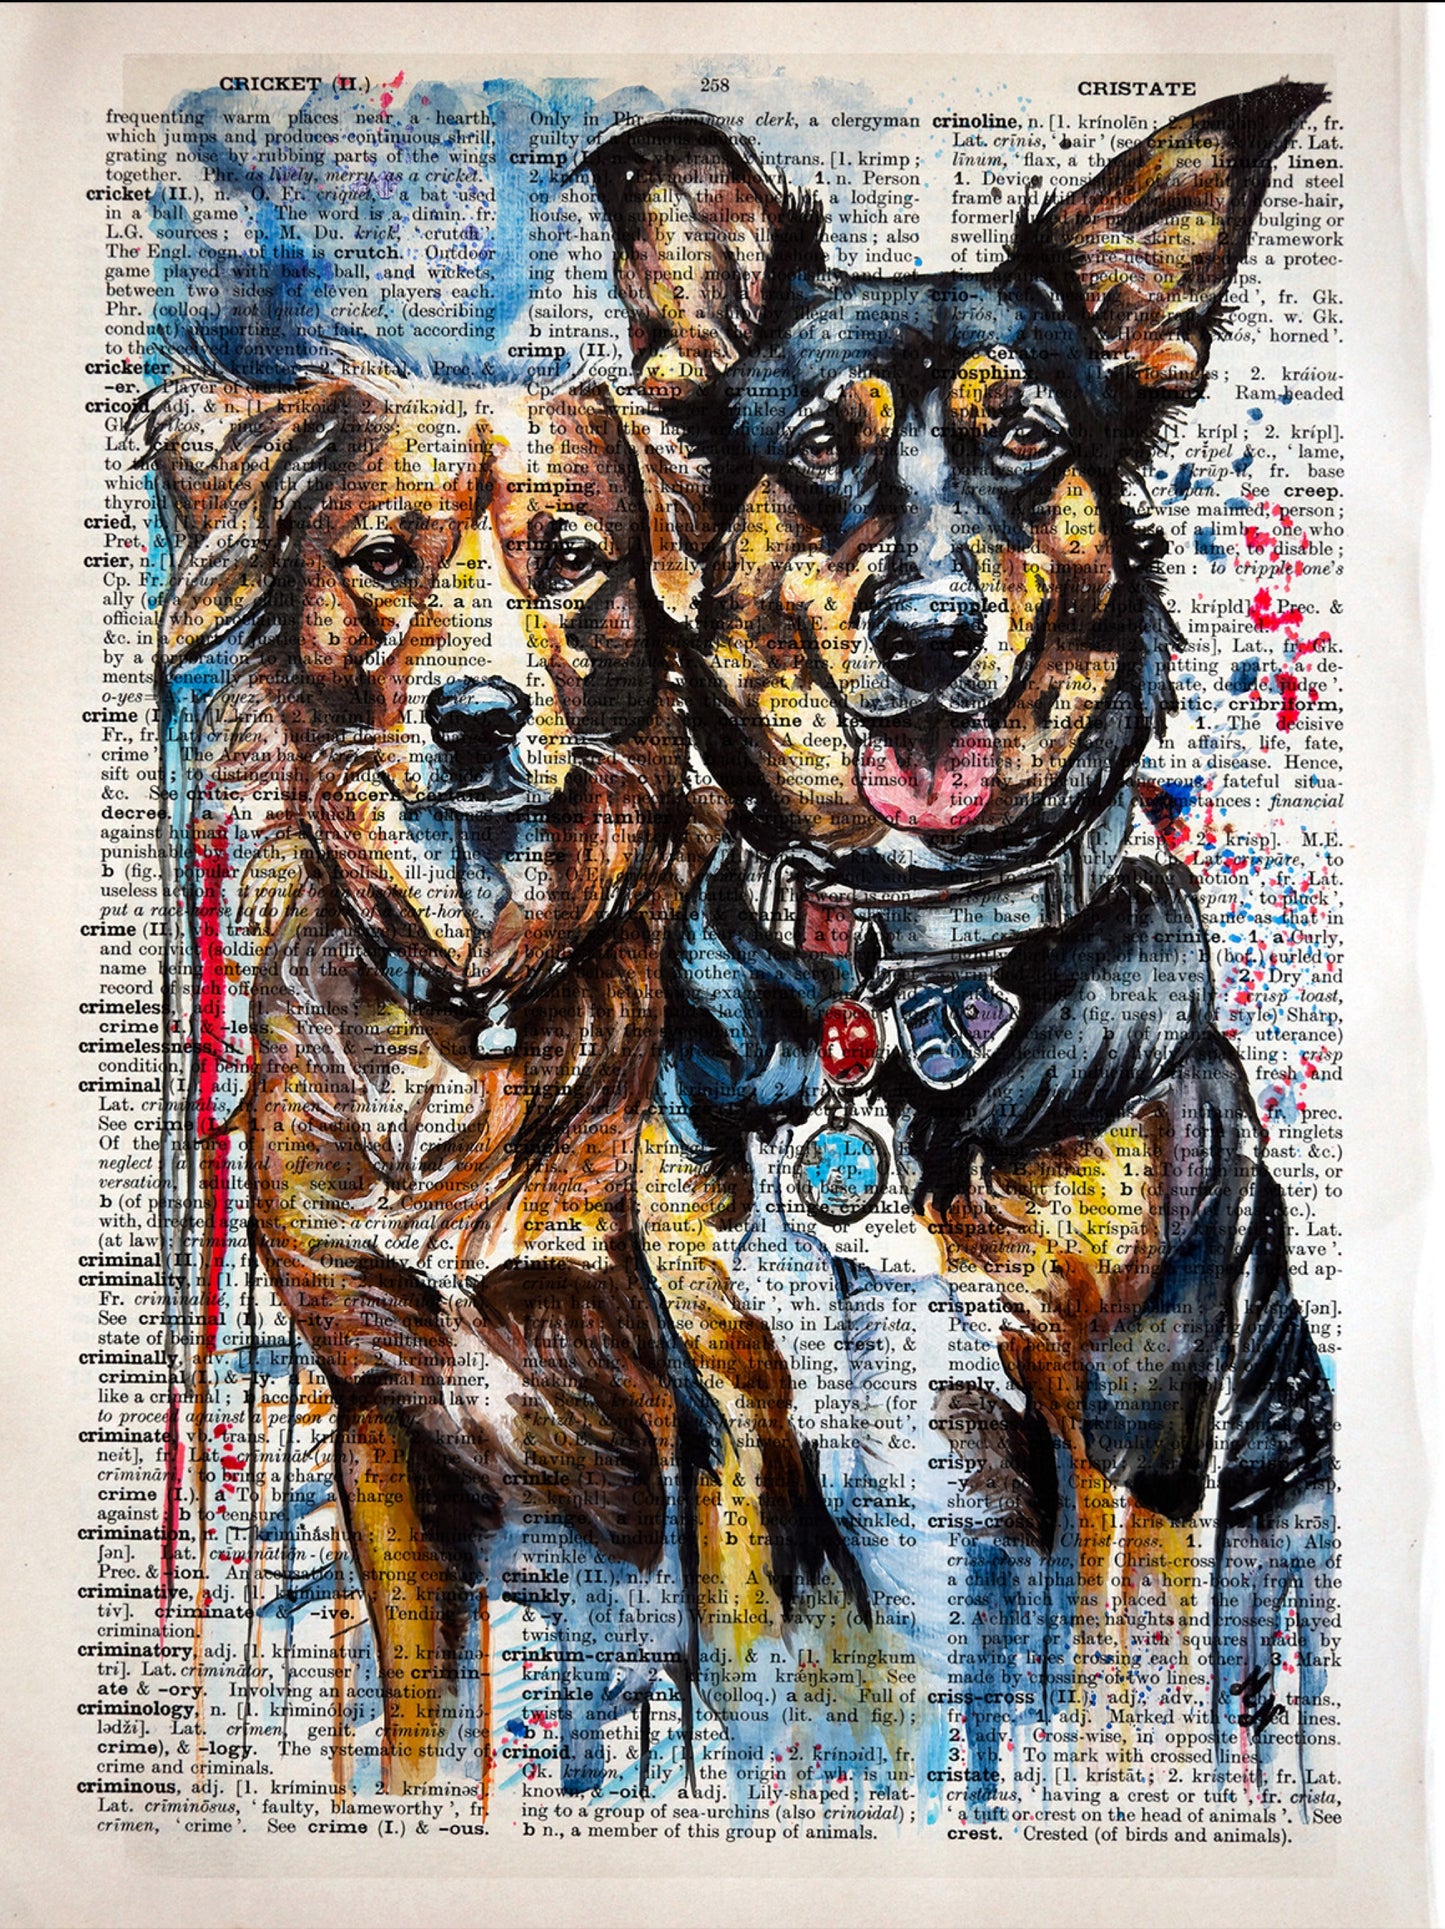 Heartwarming digital artwork "Friends" by Misty Lady, featuring two dogs with delicate brushstrokes on a vintage dictionary page.